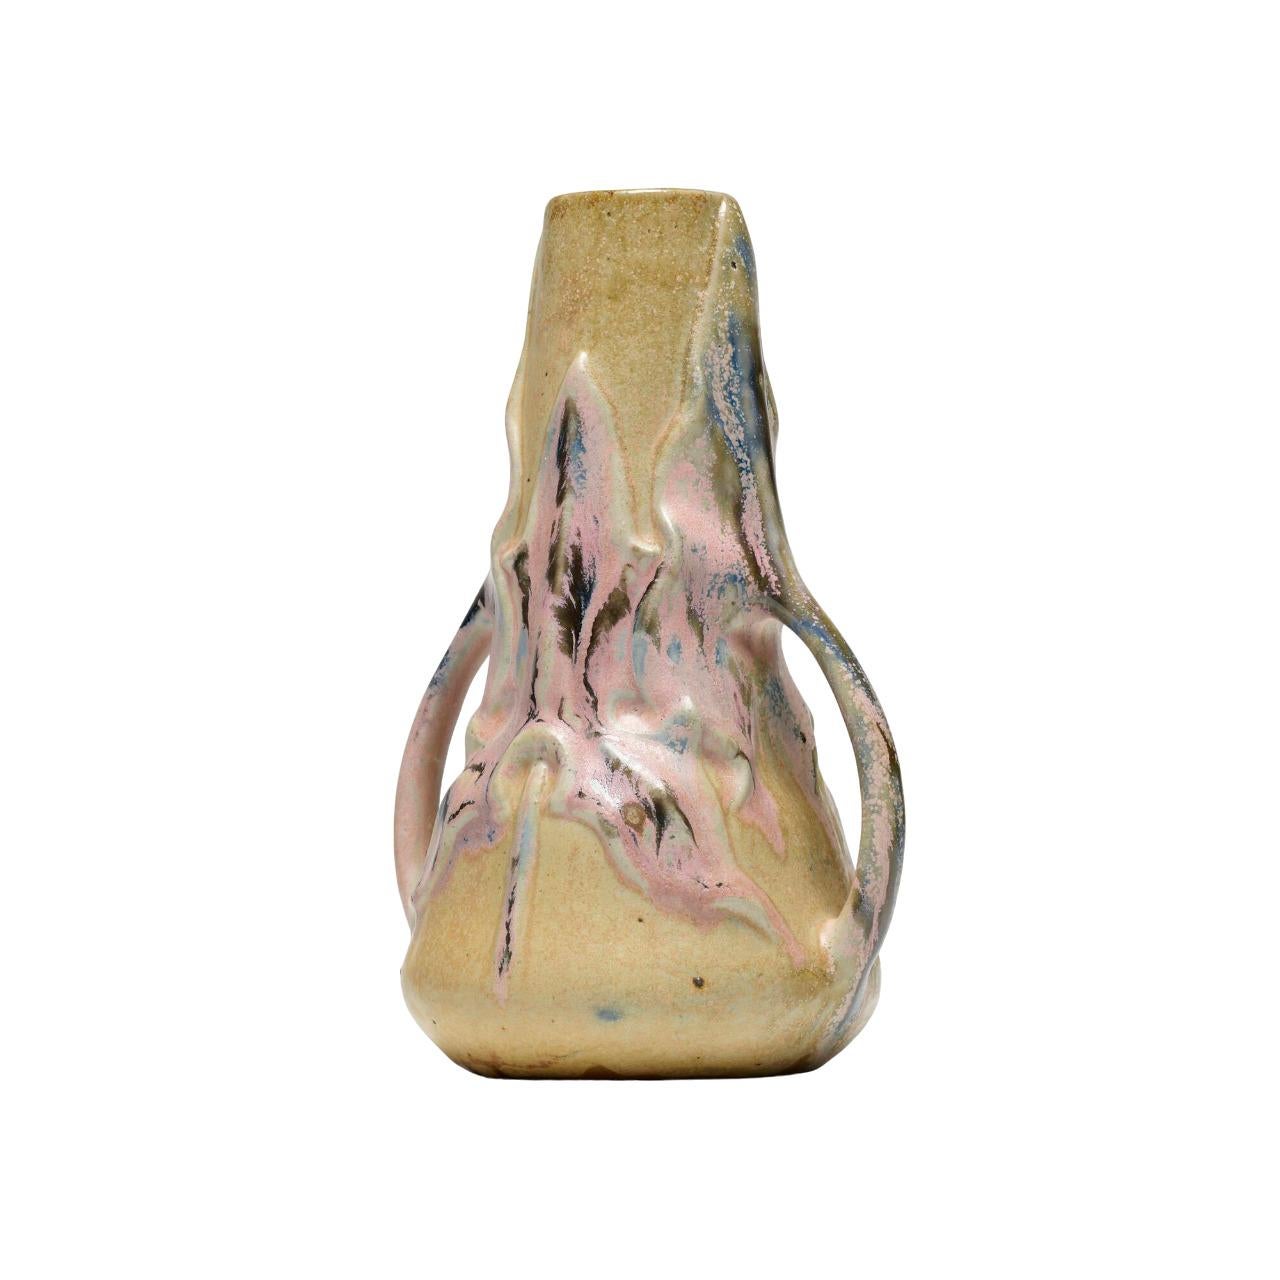 Art Nouveau ART NOUVEAU two-handled GREBER Vase, with some pink flashes, refined ceramic For Sale